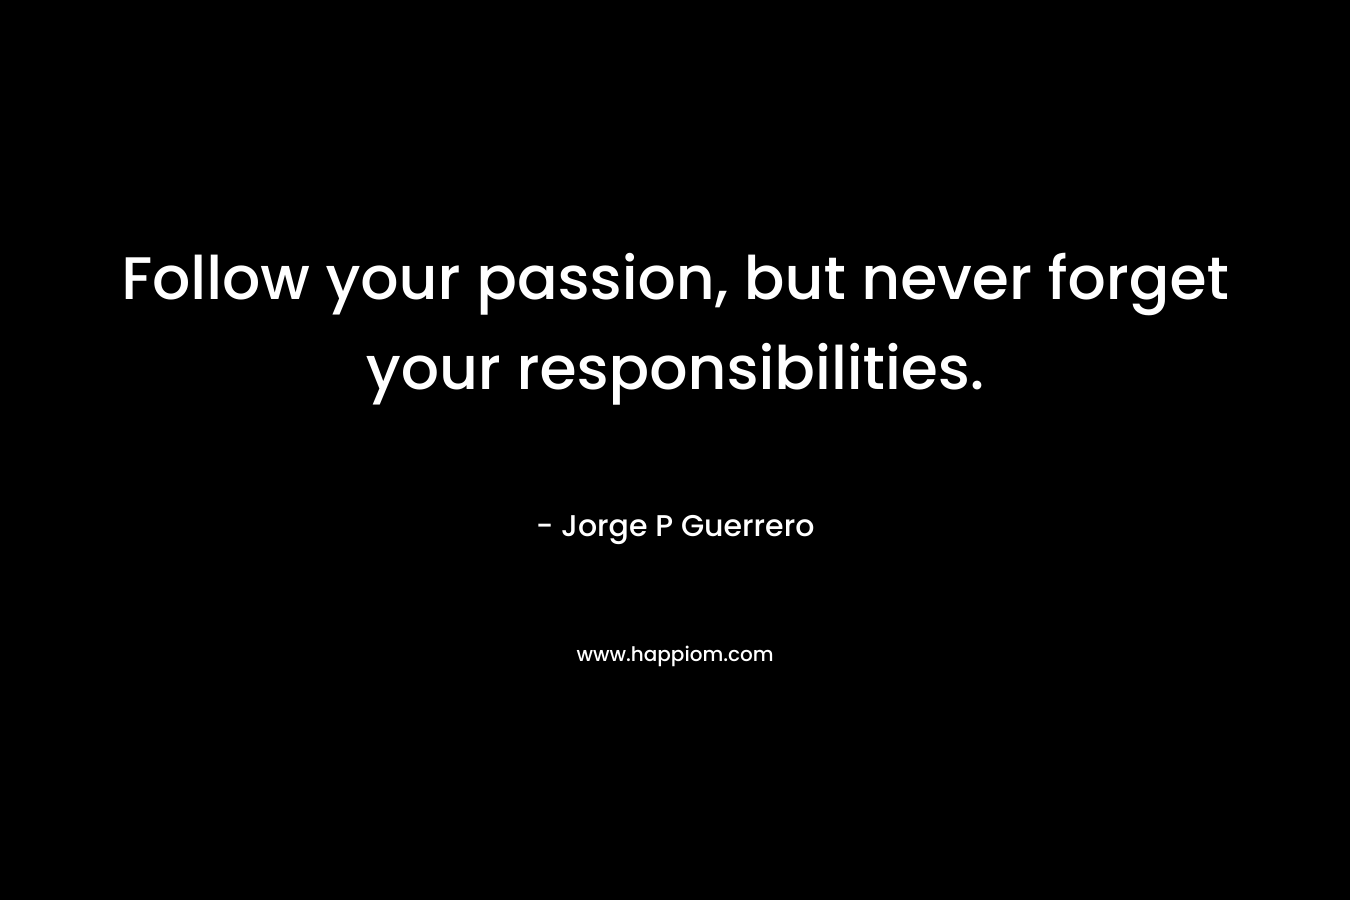 Follow your passion, but never forget your responsibilities. – Jorge P Guerrero